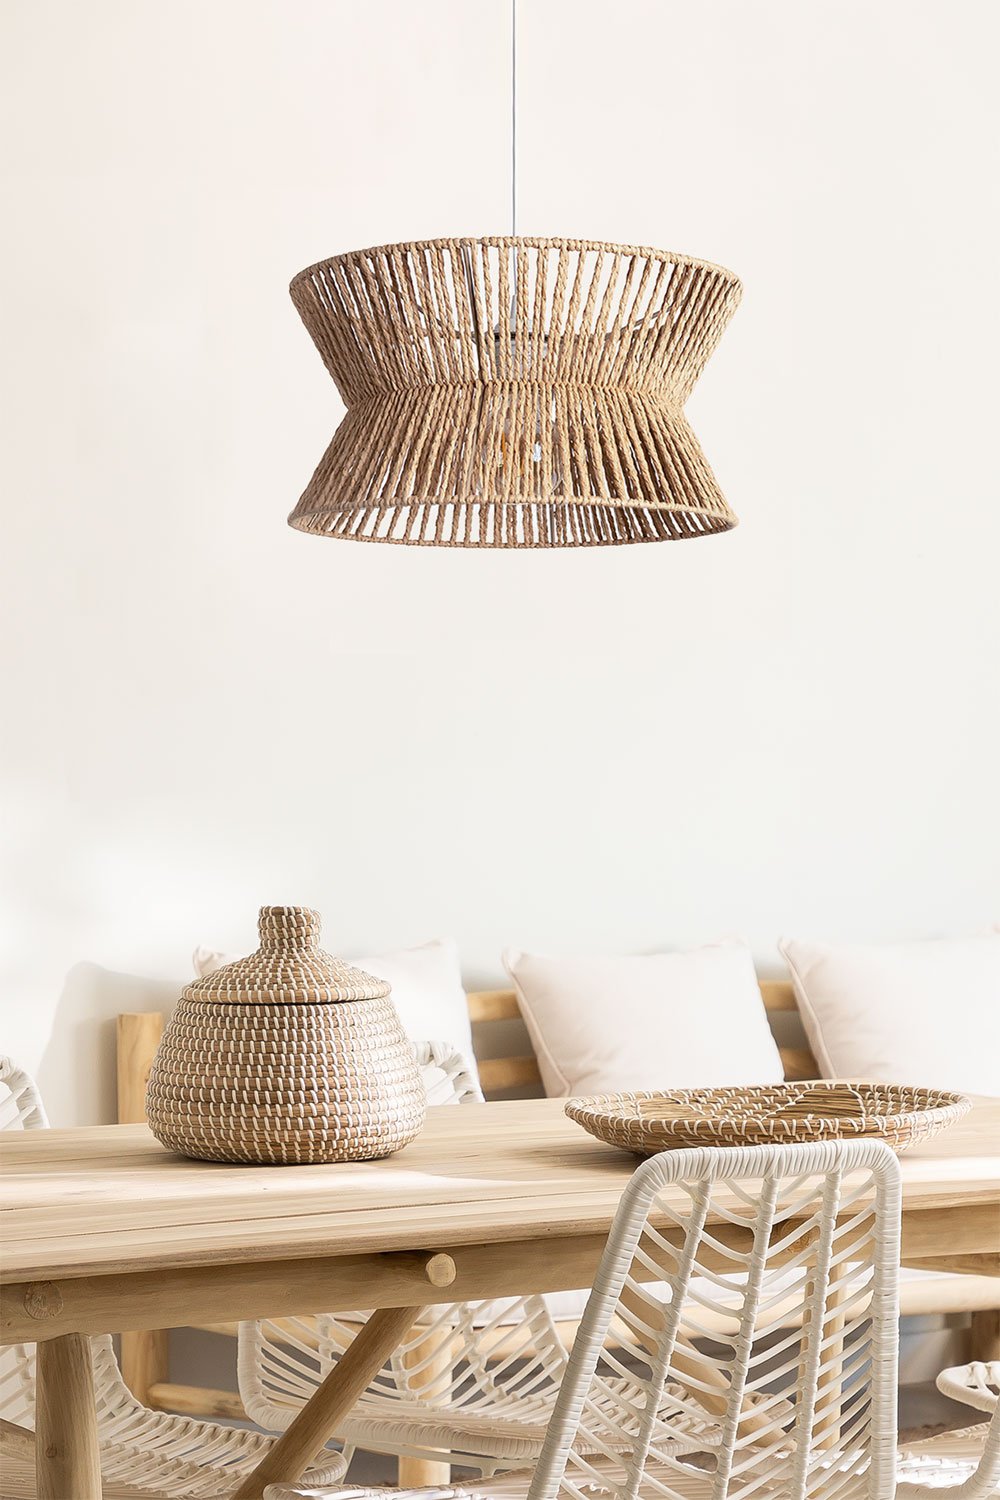  Braided Paper Ceiling Lamp Bonny, gallery image 1